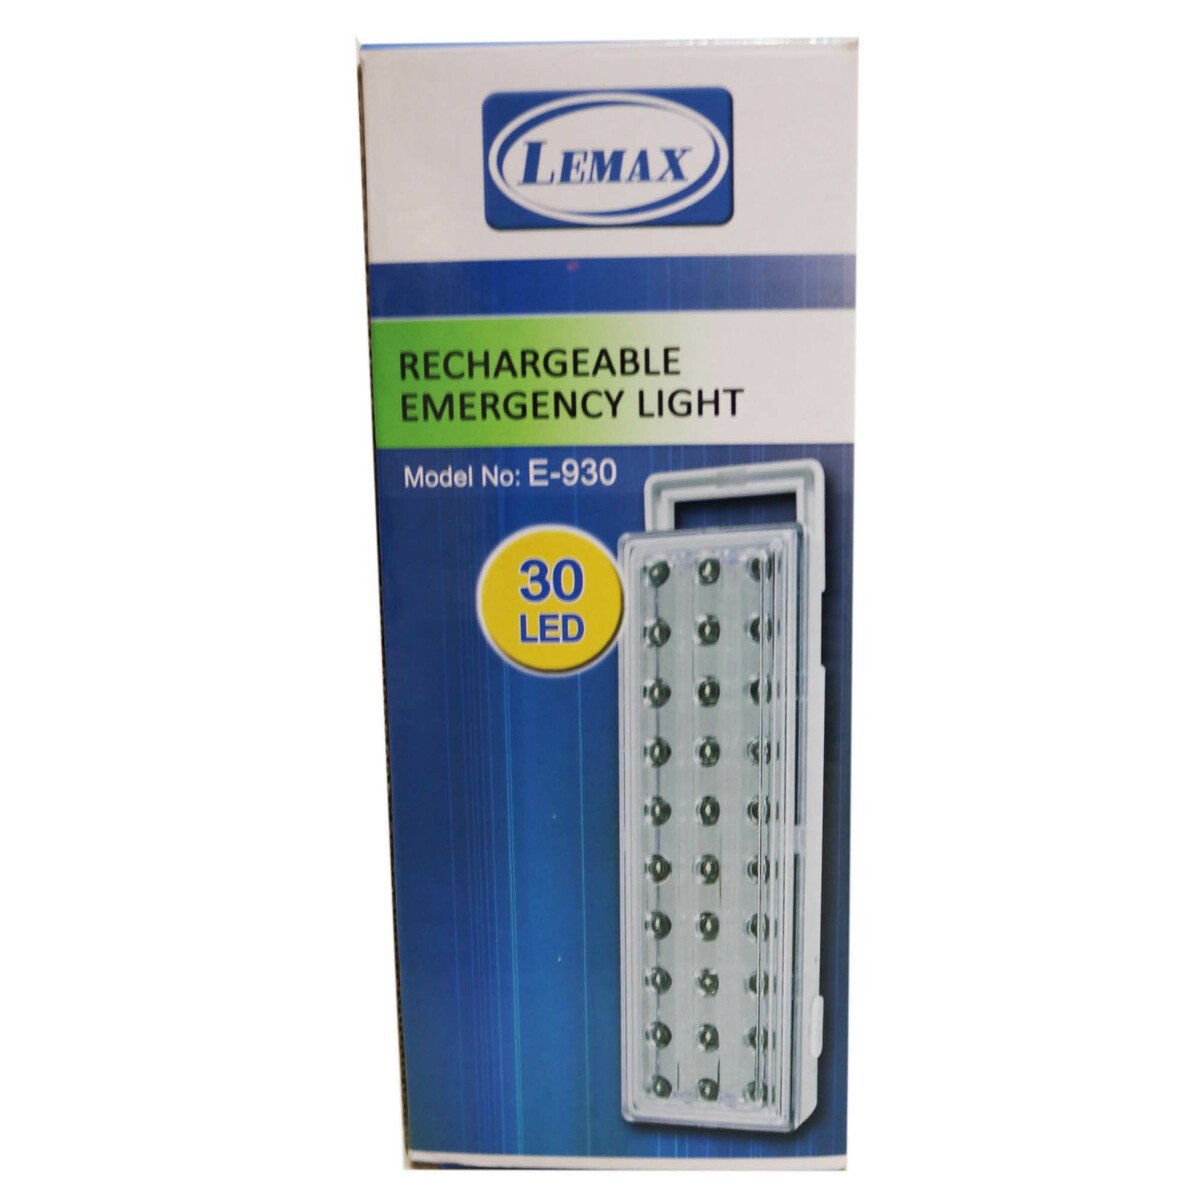 Lemax Rechargeable Emergency Light E930